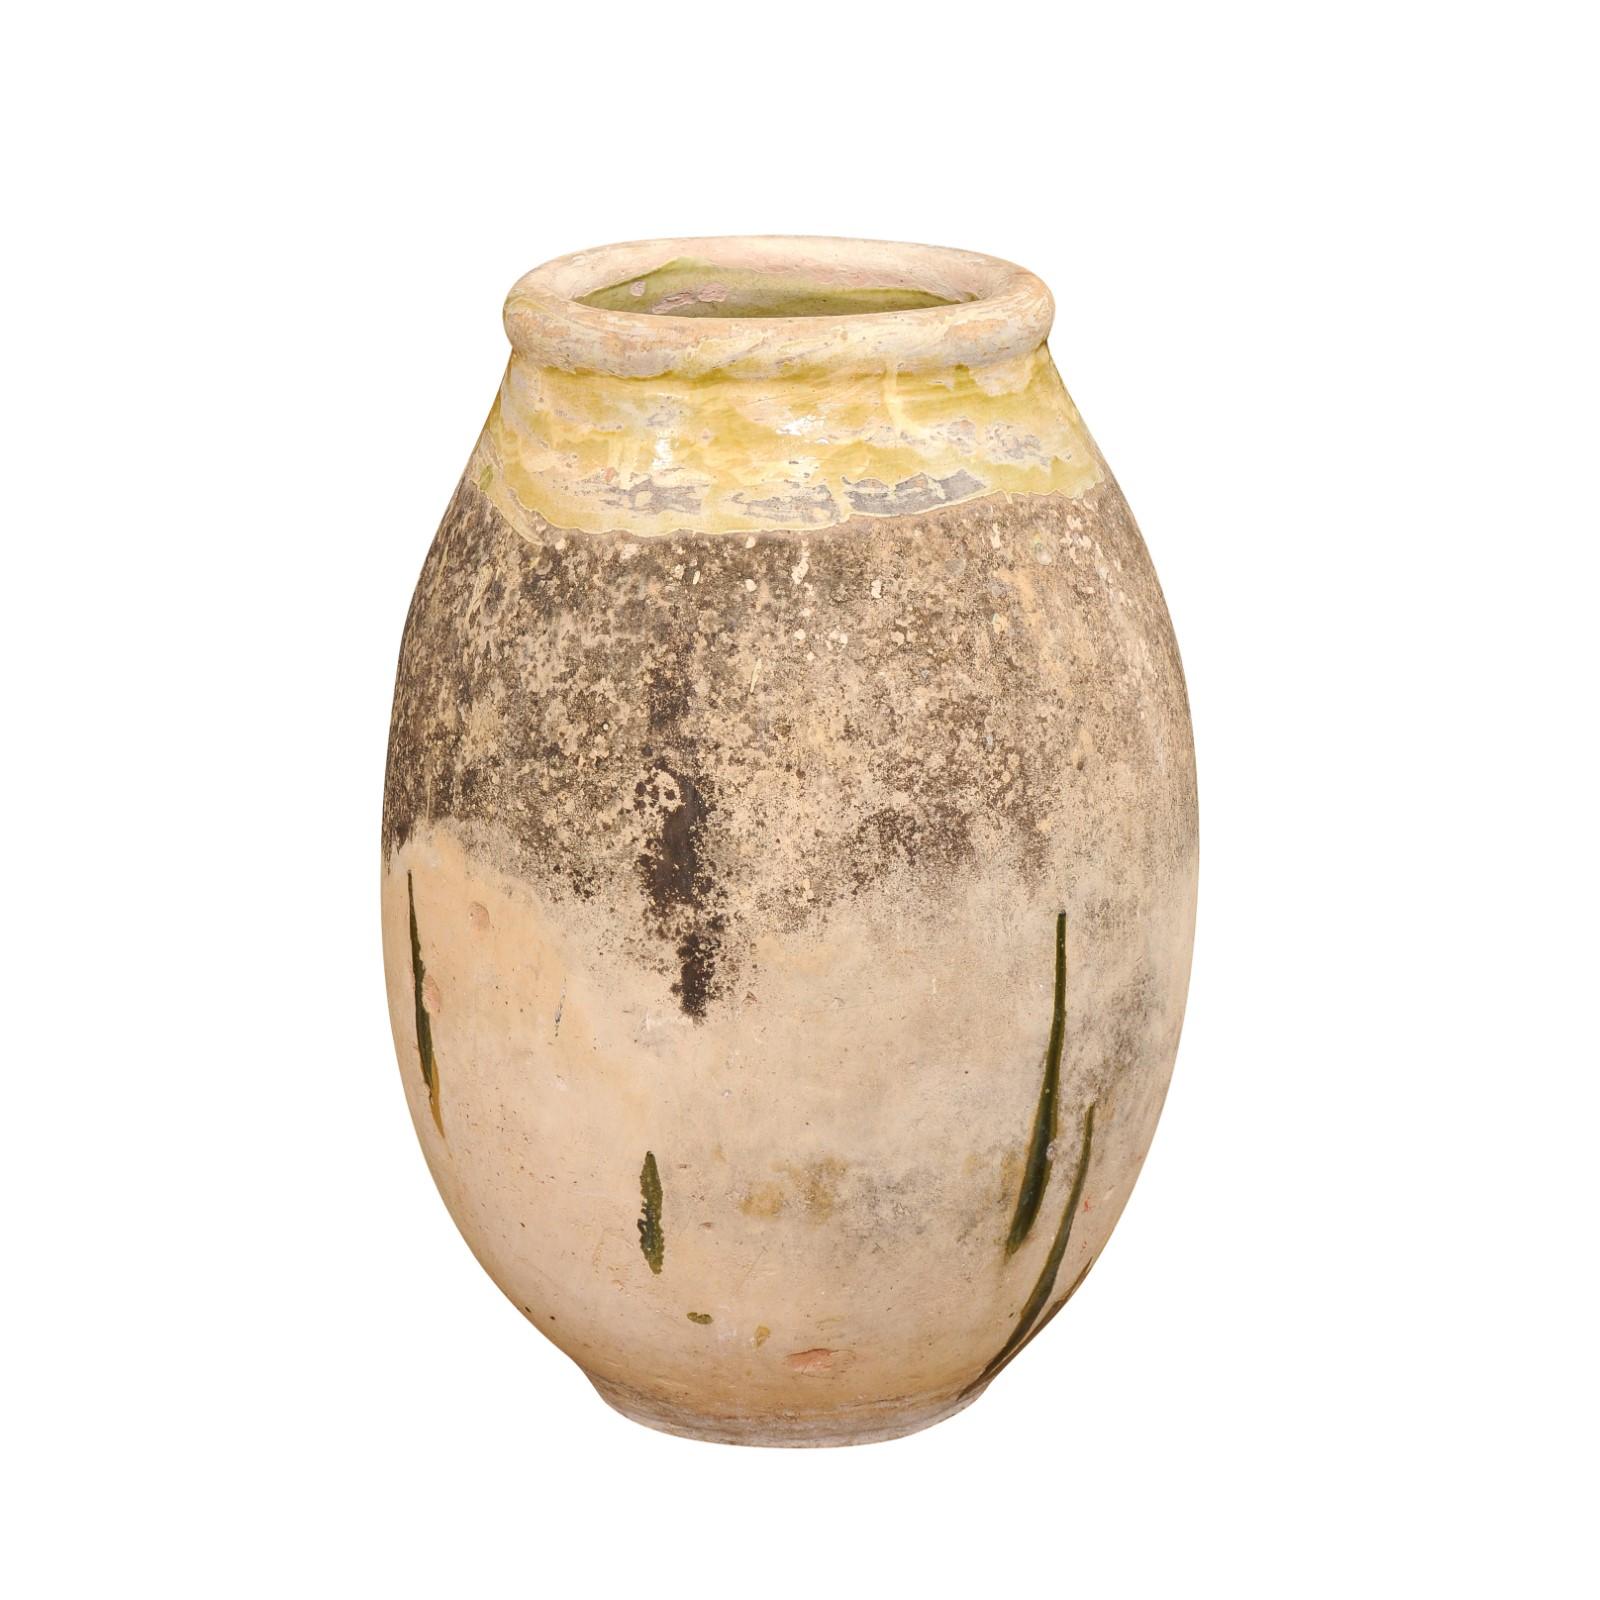 A French Provincial terracotta Biot jar from the 19th century with yellow glaze and rustic character. Elevate your space with this exquisite French 19th century glazed terracotta Biot jar that exudes rustic elegance and the timeless charm of